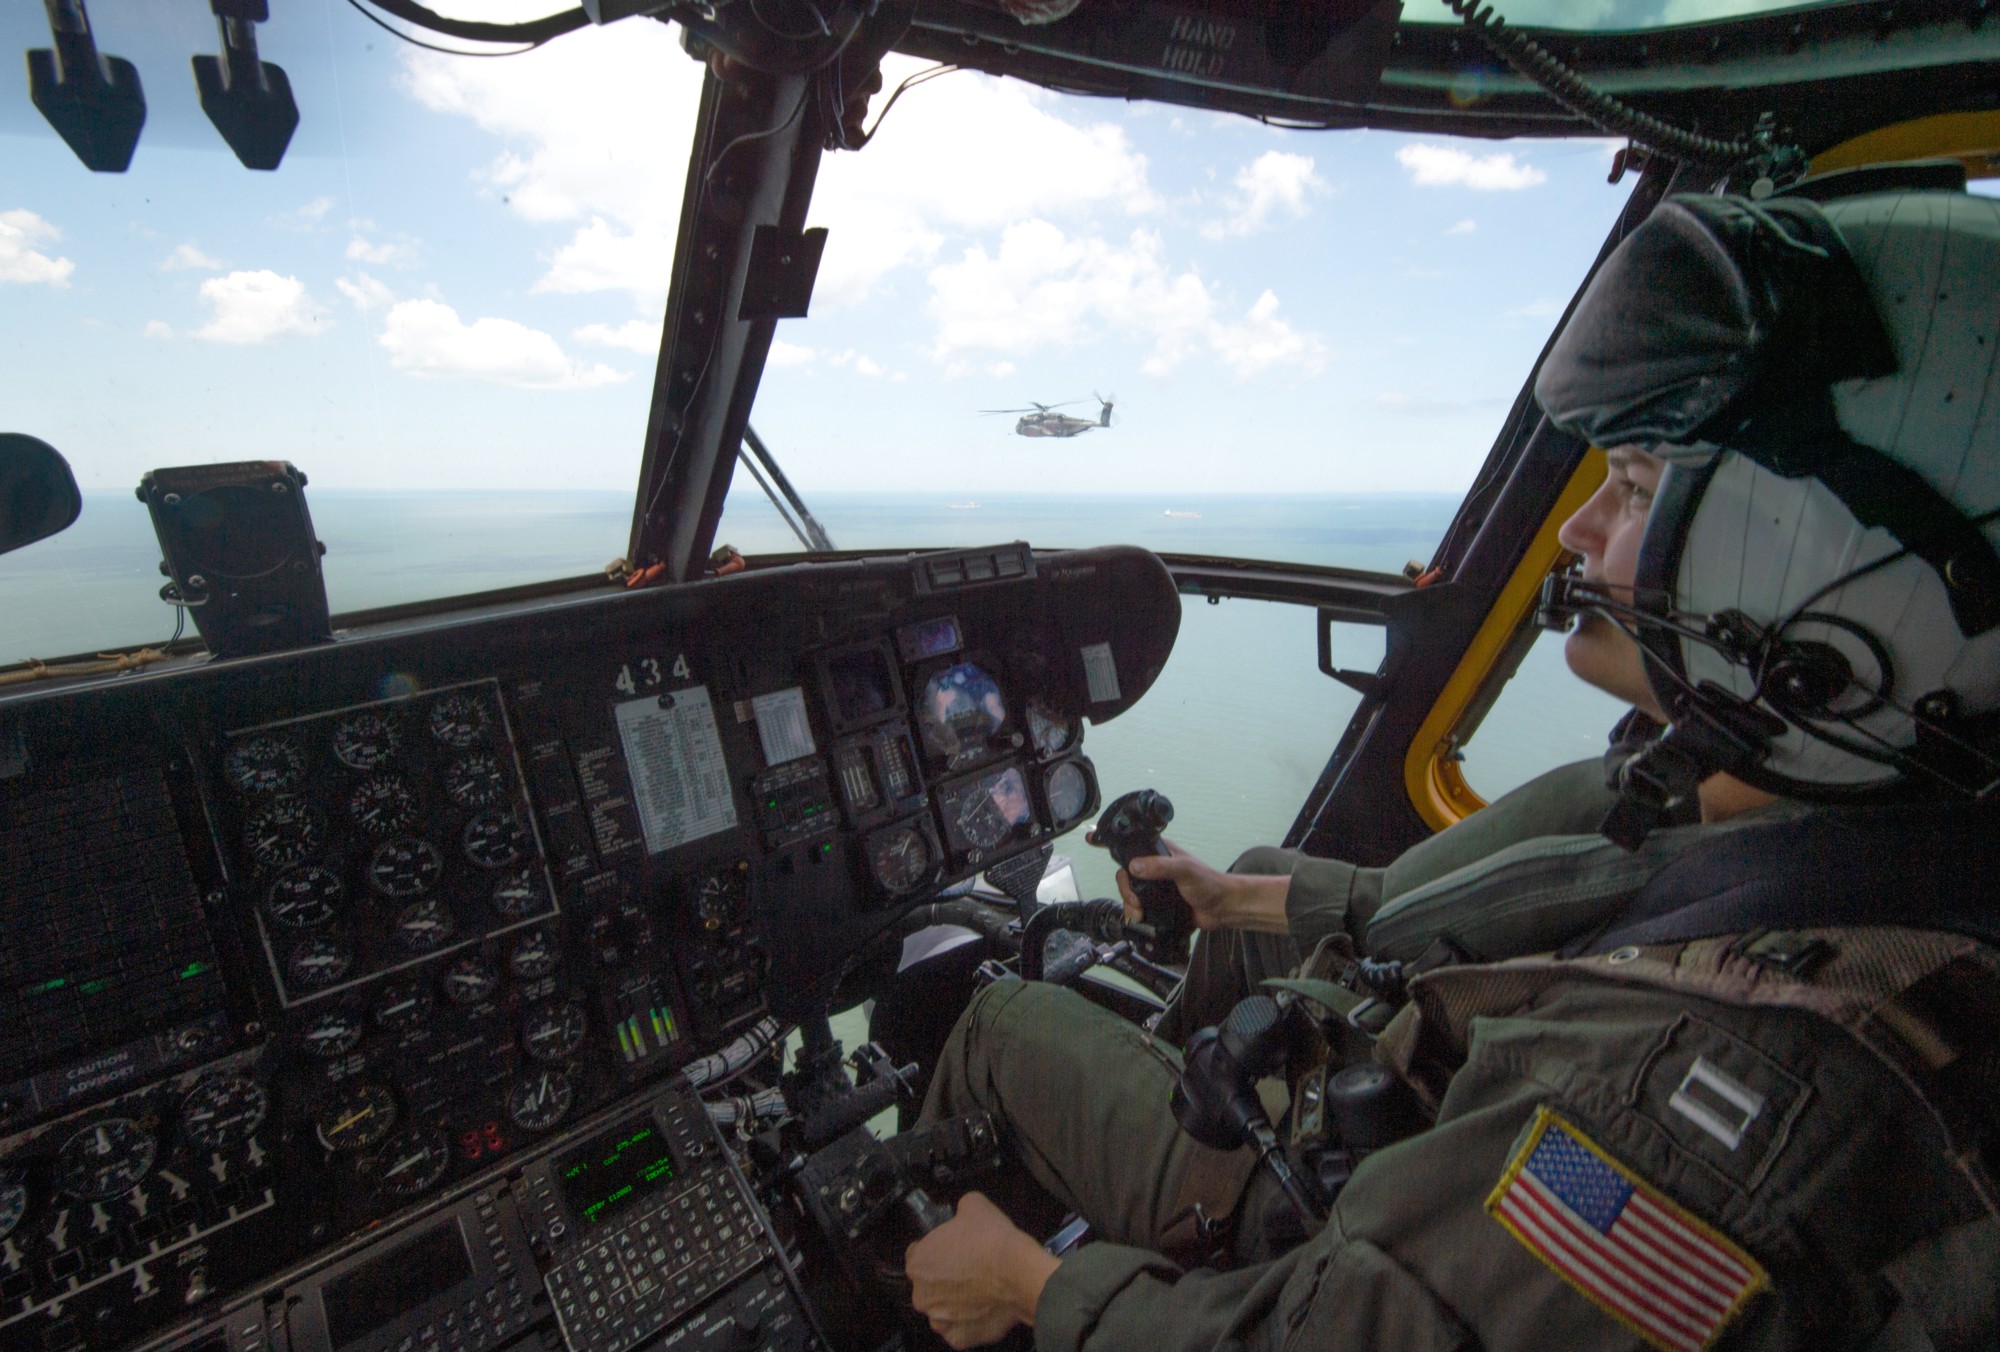 hm-12 sea dragons helicopter mine countermeasures squadron navy mh-53d cockpit 38